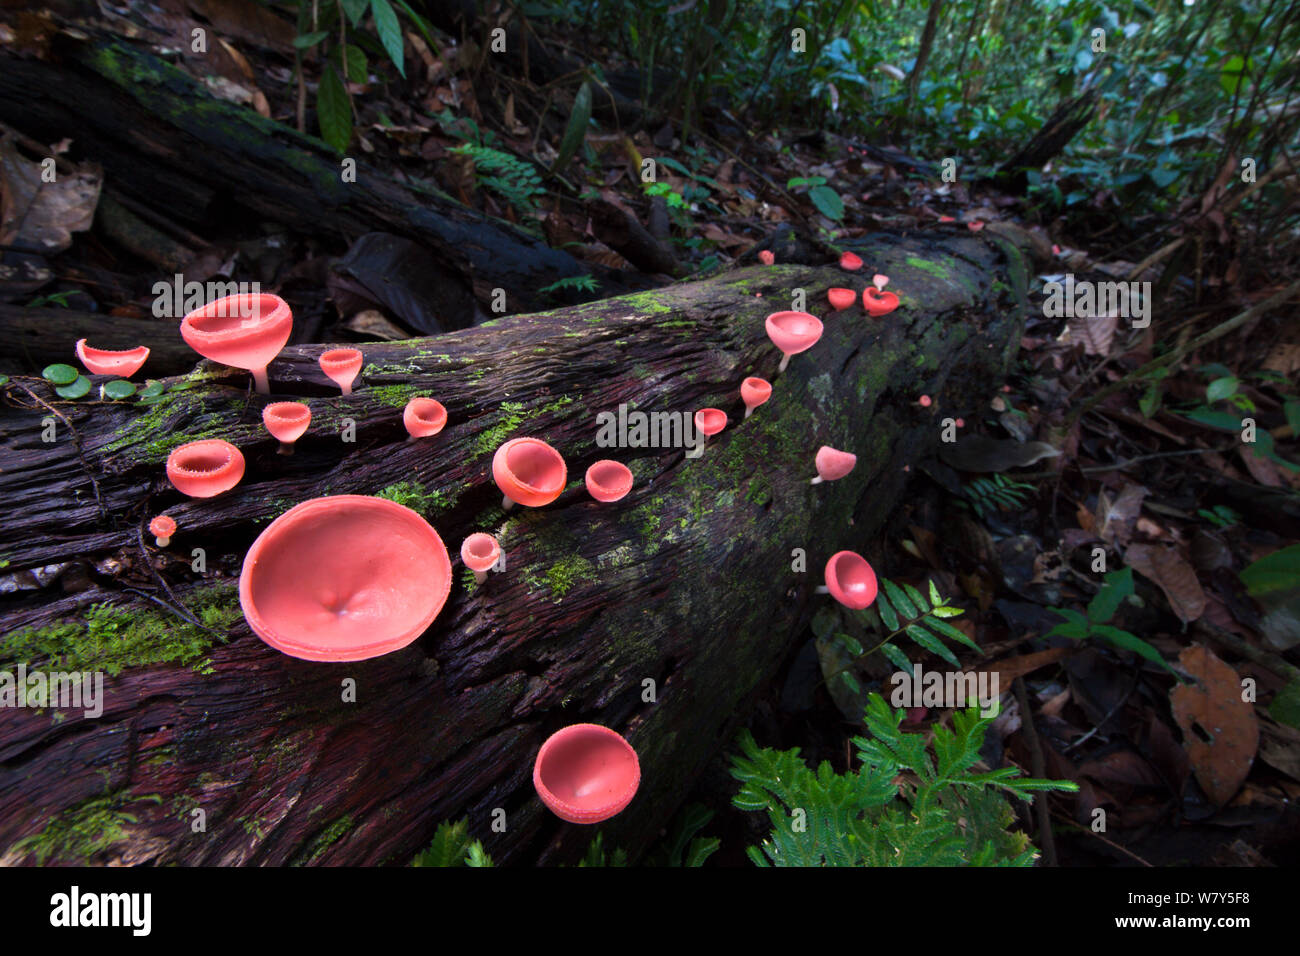 Cup fungi (Cookeina sp) growing on decaying log, Danum Valley, Sabah, Borneo. Stock Photo